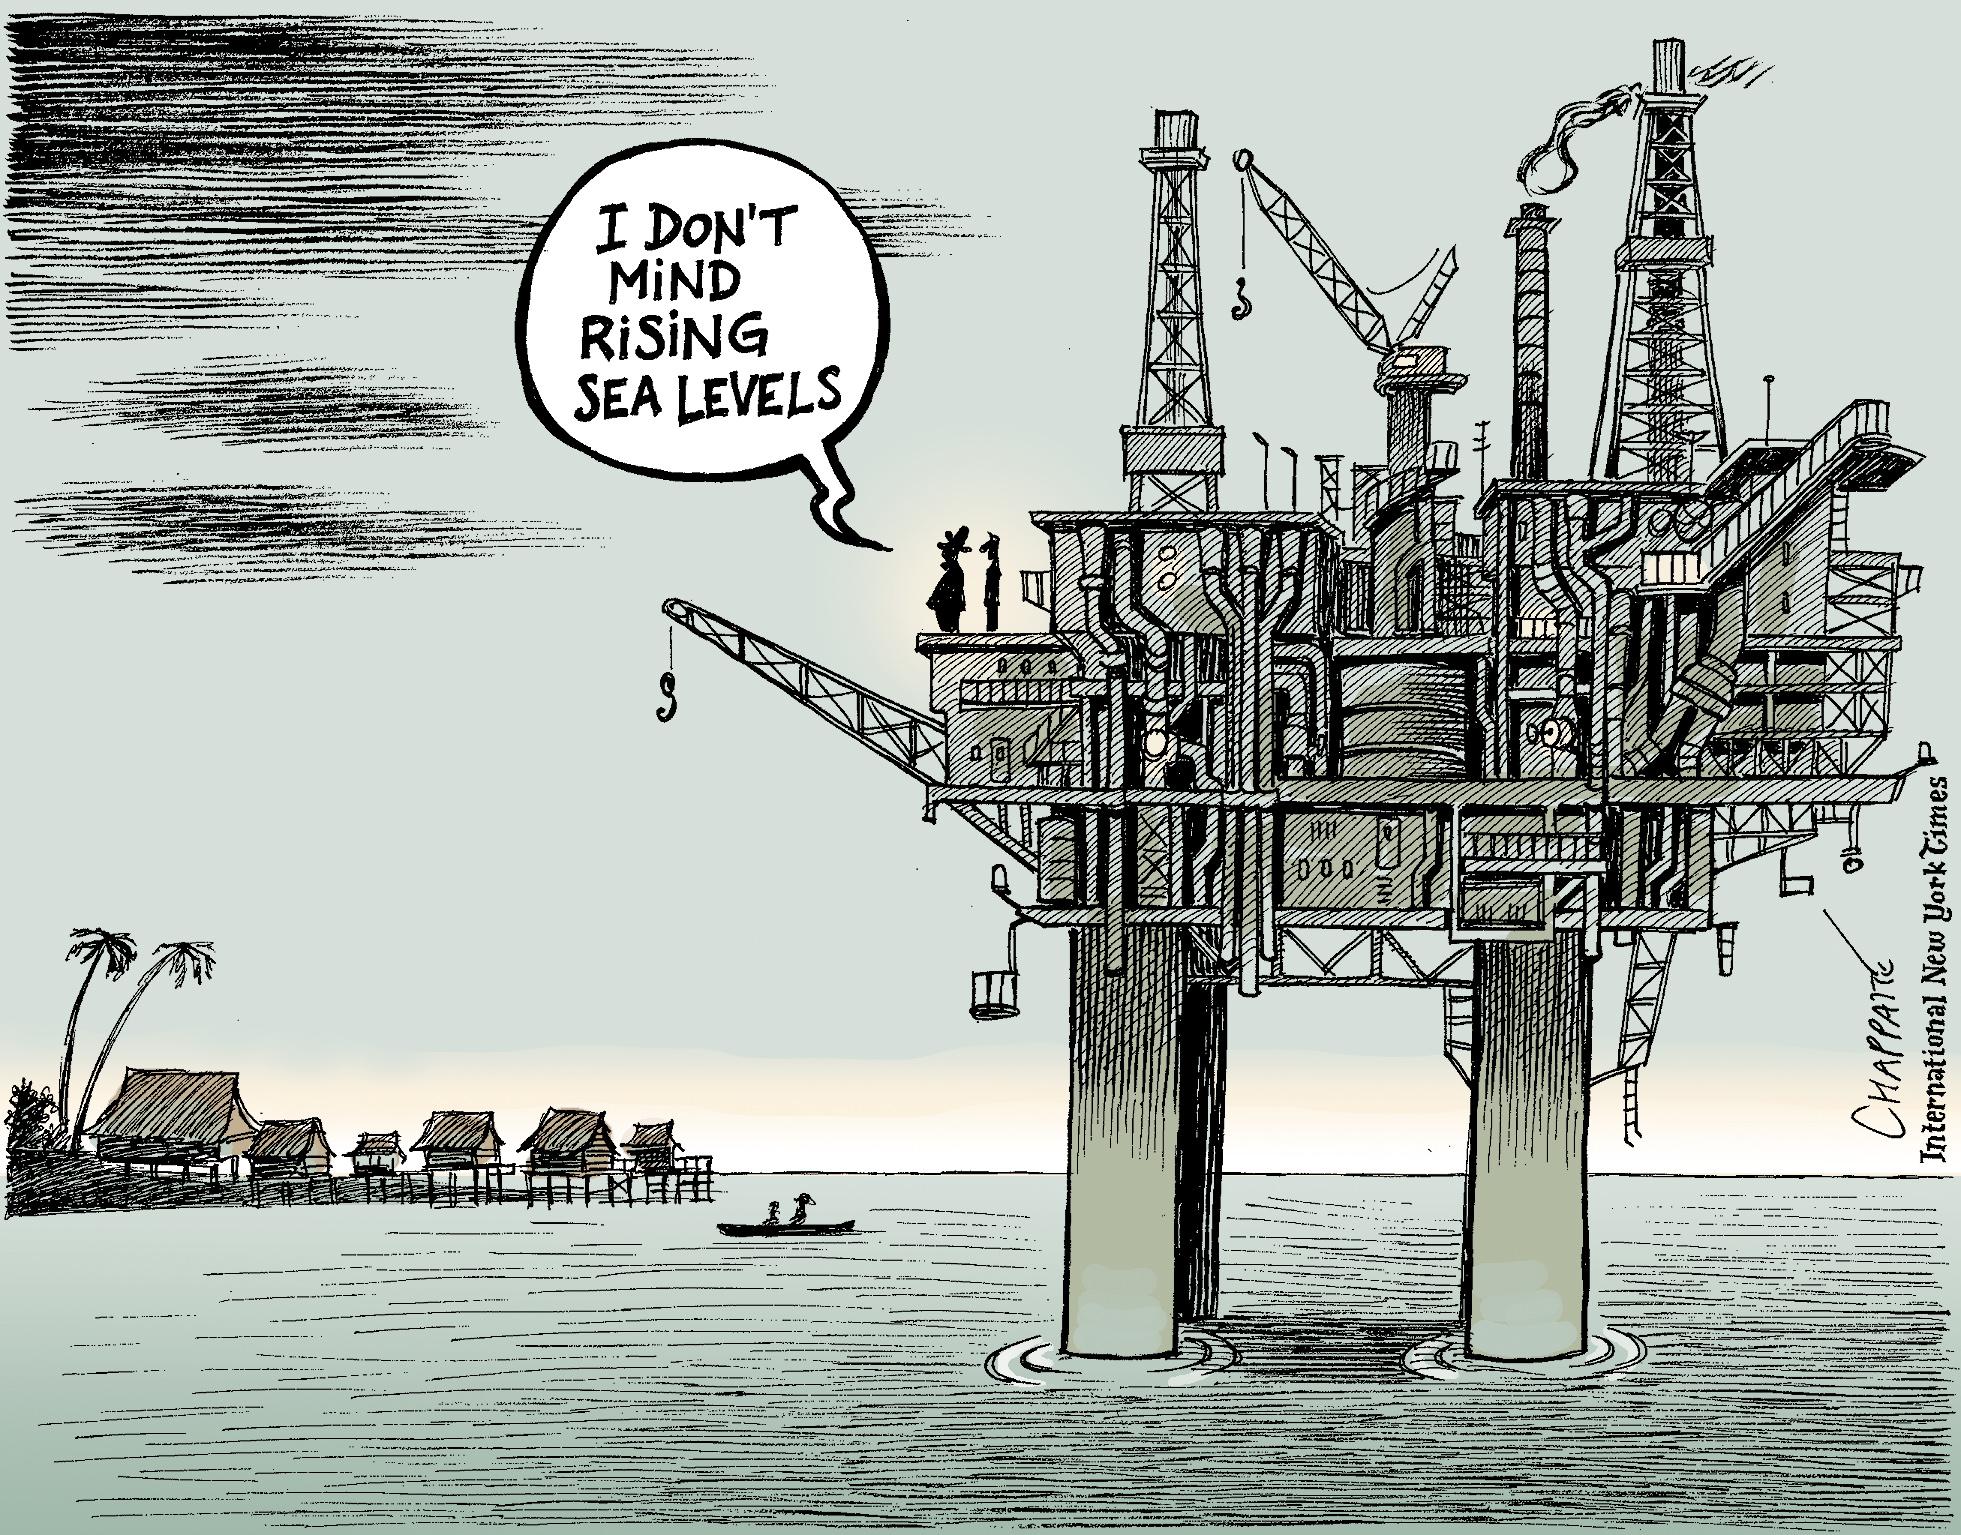 Oil industry and climate change